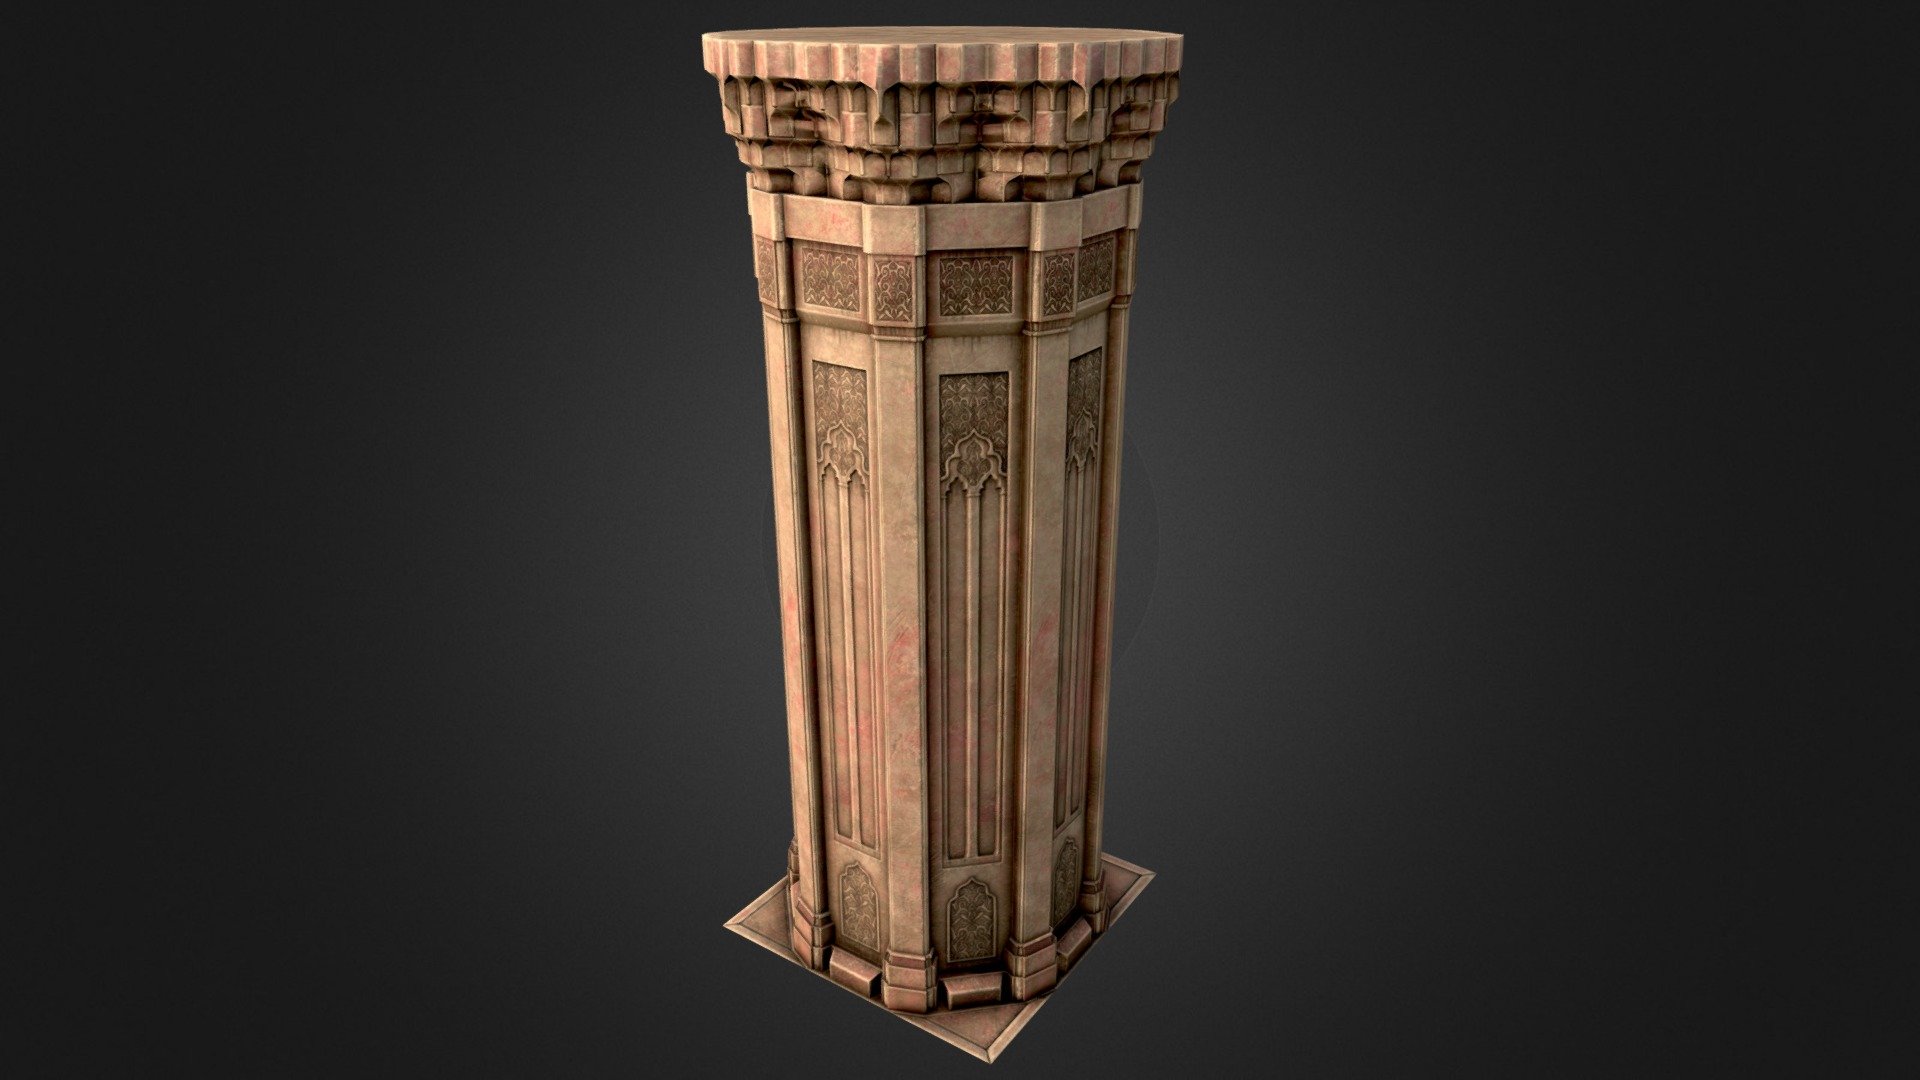 A large pillar in a middle-eastern style, with a head made on a muqarnas pattern

Made for https://www.artstation.com/artwork/gJvoBx - Muqarnas - Pillar - Download Free 3D model by andrea.notarstefano 3d model